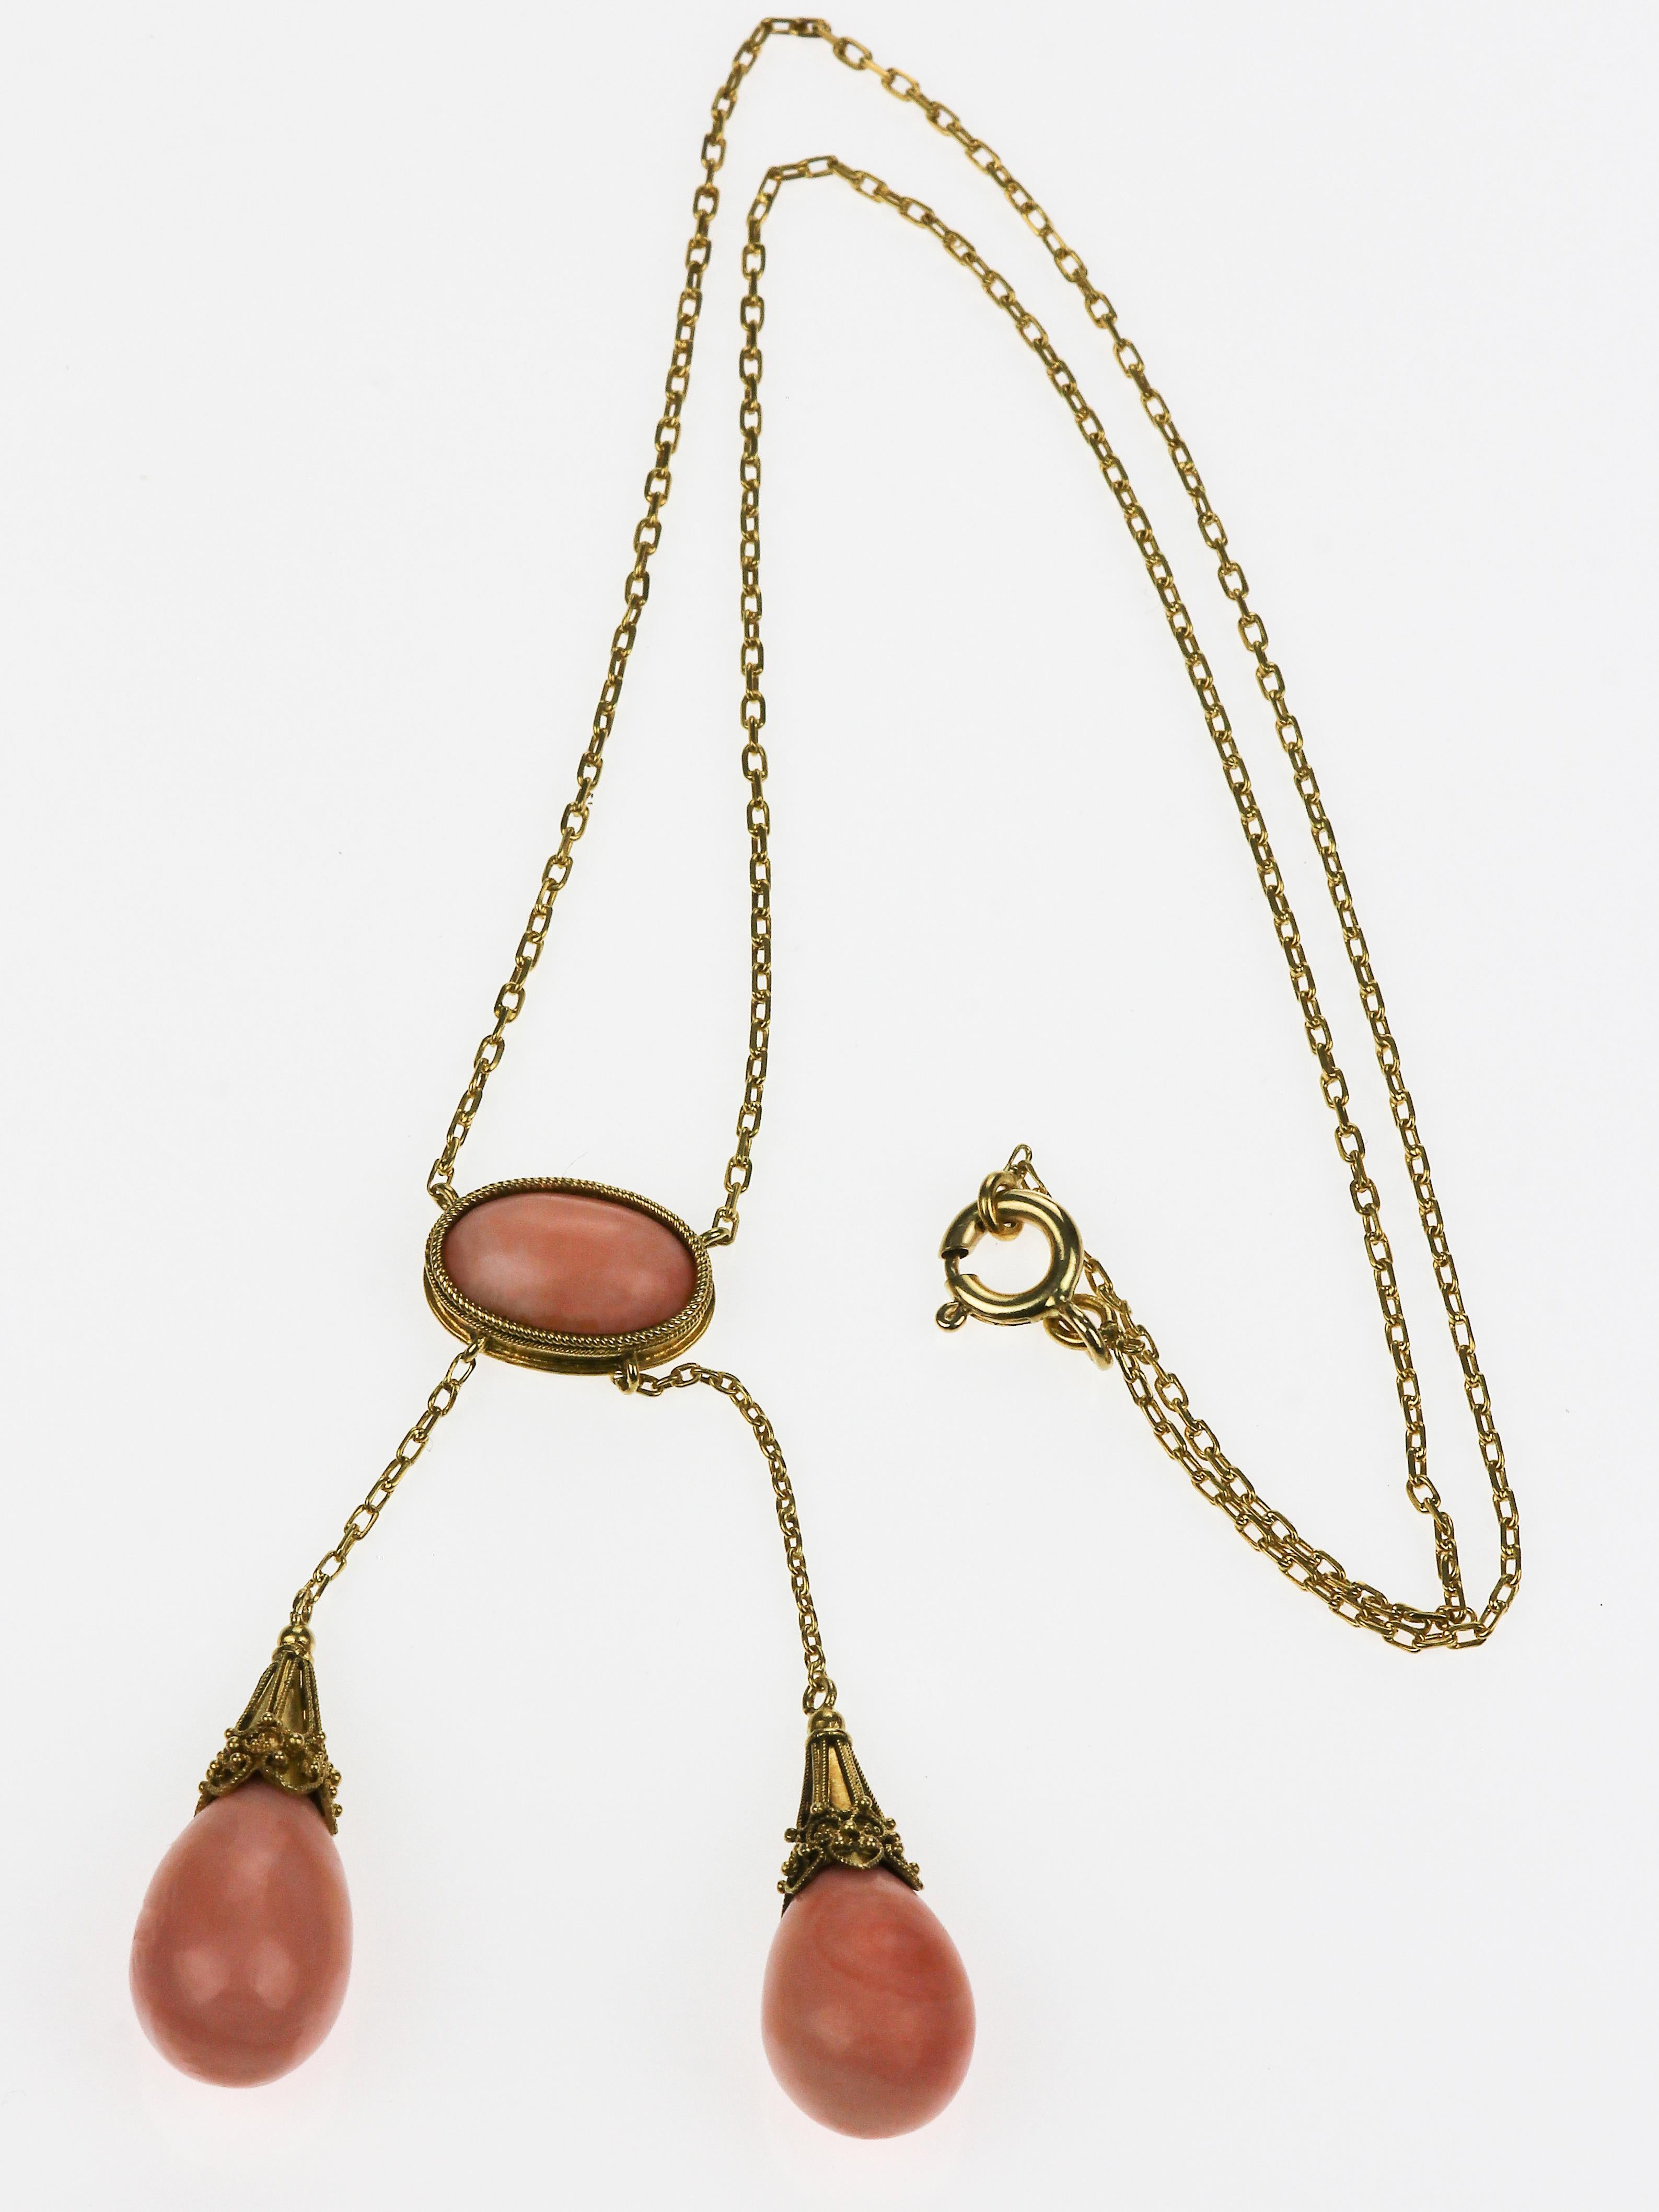 Gorgeous, this piece is a unique victorian antique necklace containing several pastel pink corals in different shades which aluminate the room. The corals are in various shapes, two are teardrops resembling bulbs encased in a beautiful gold accent